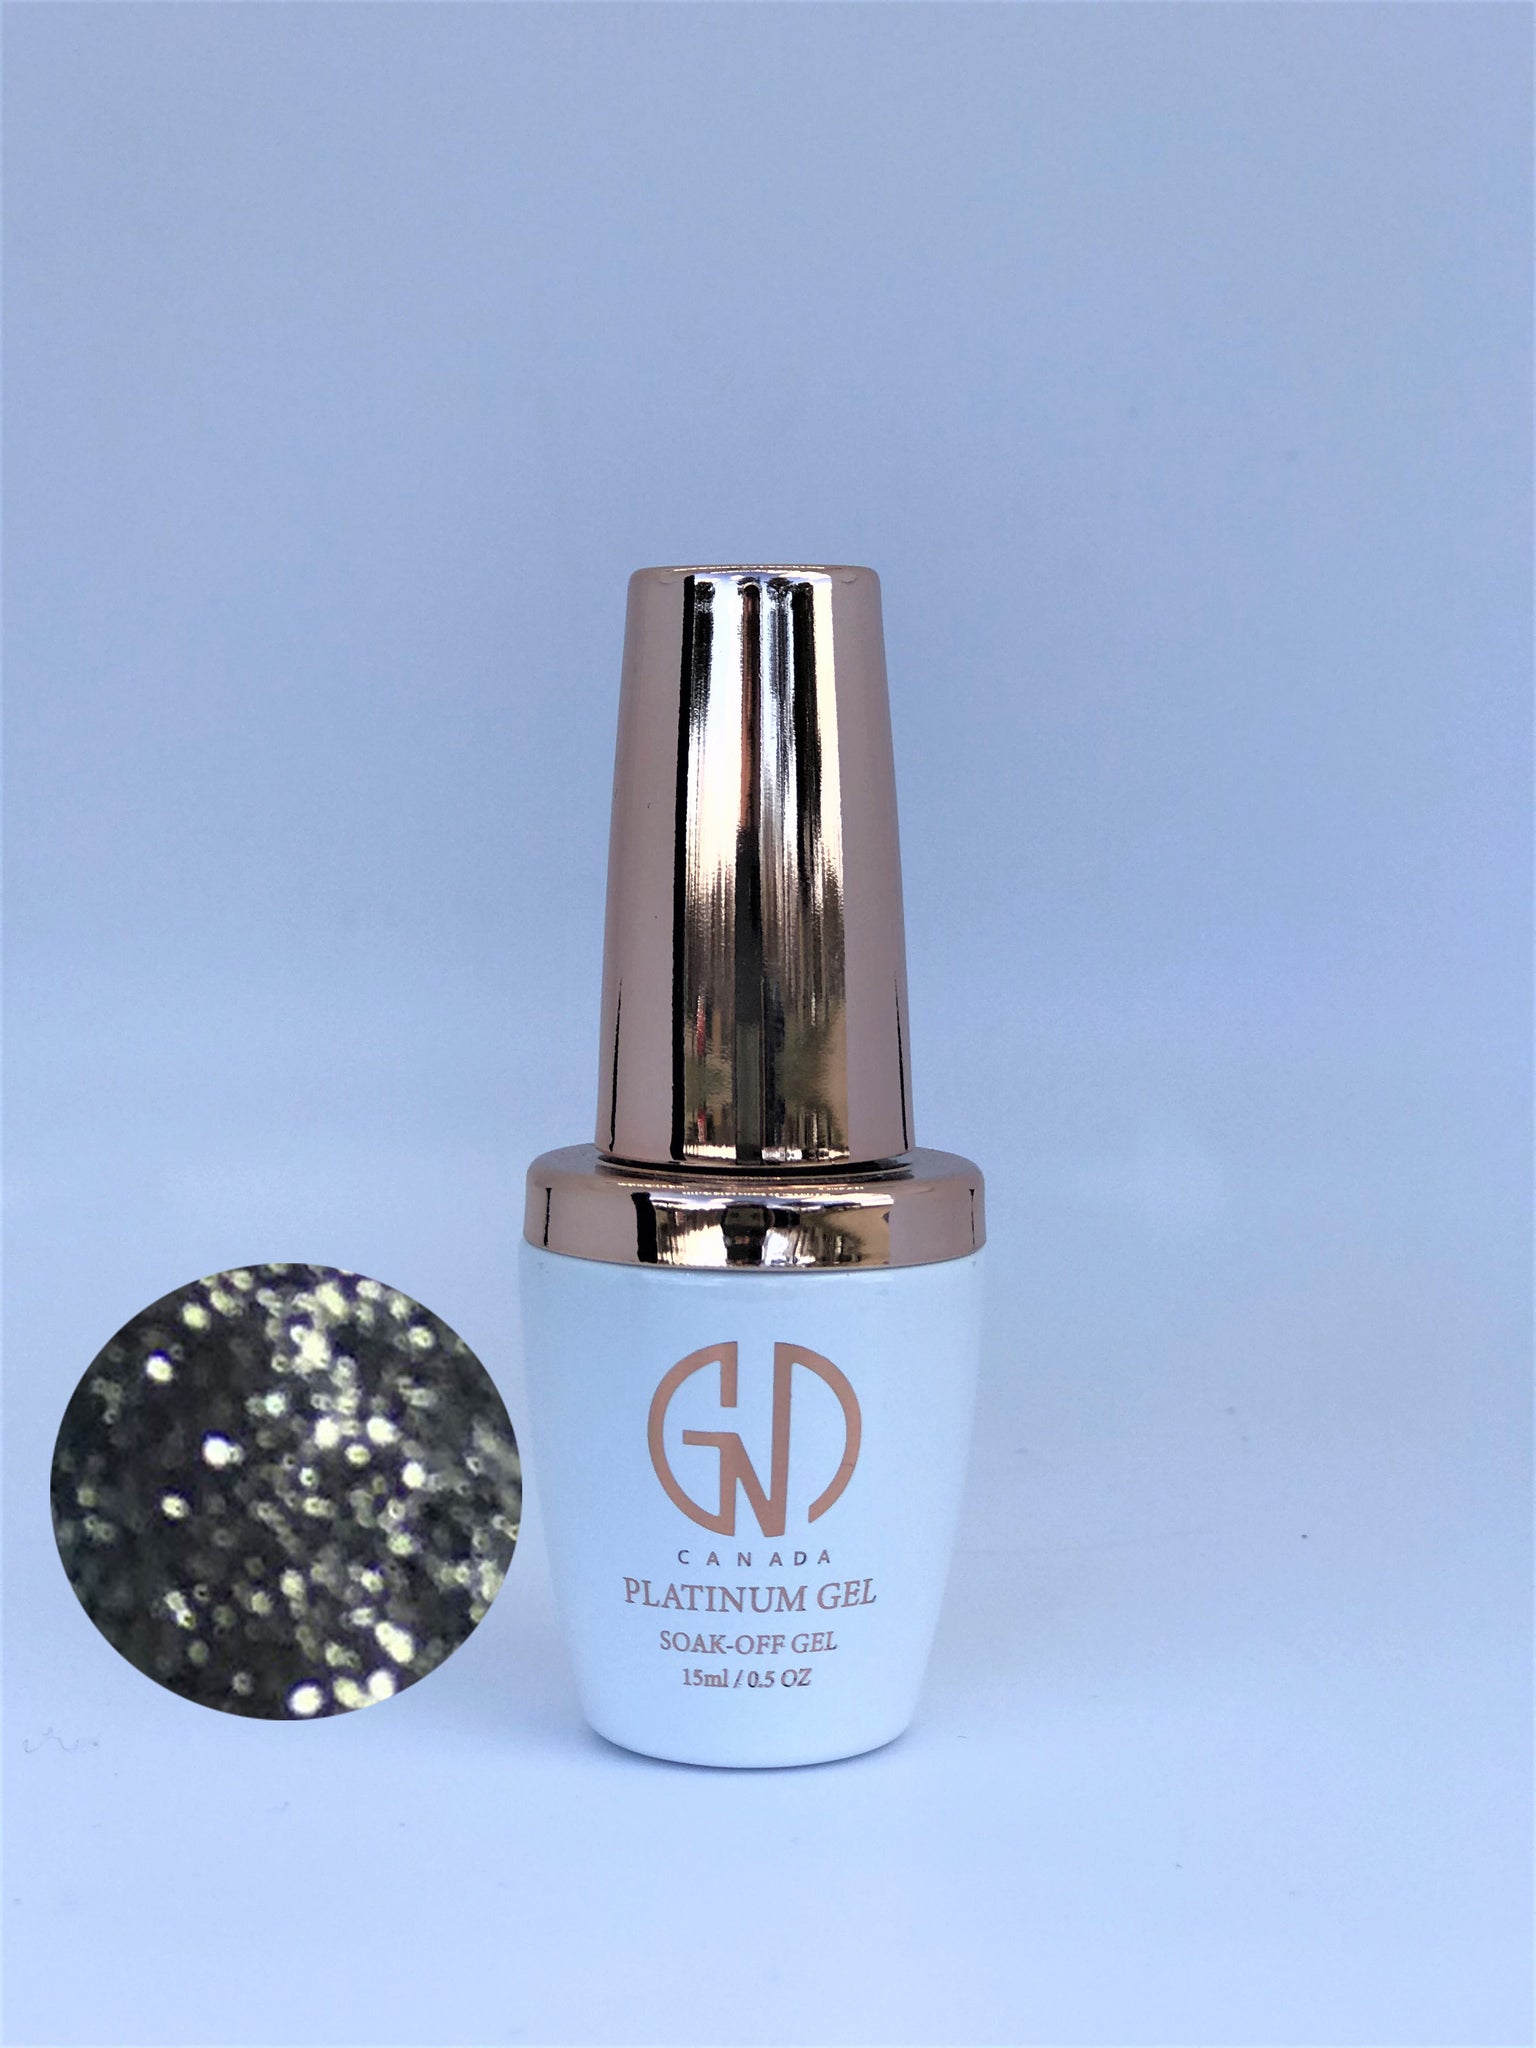 GND Platinum Gel #10 | GND Canada® - CM Nails & Beauty Supply